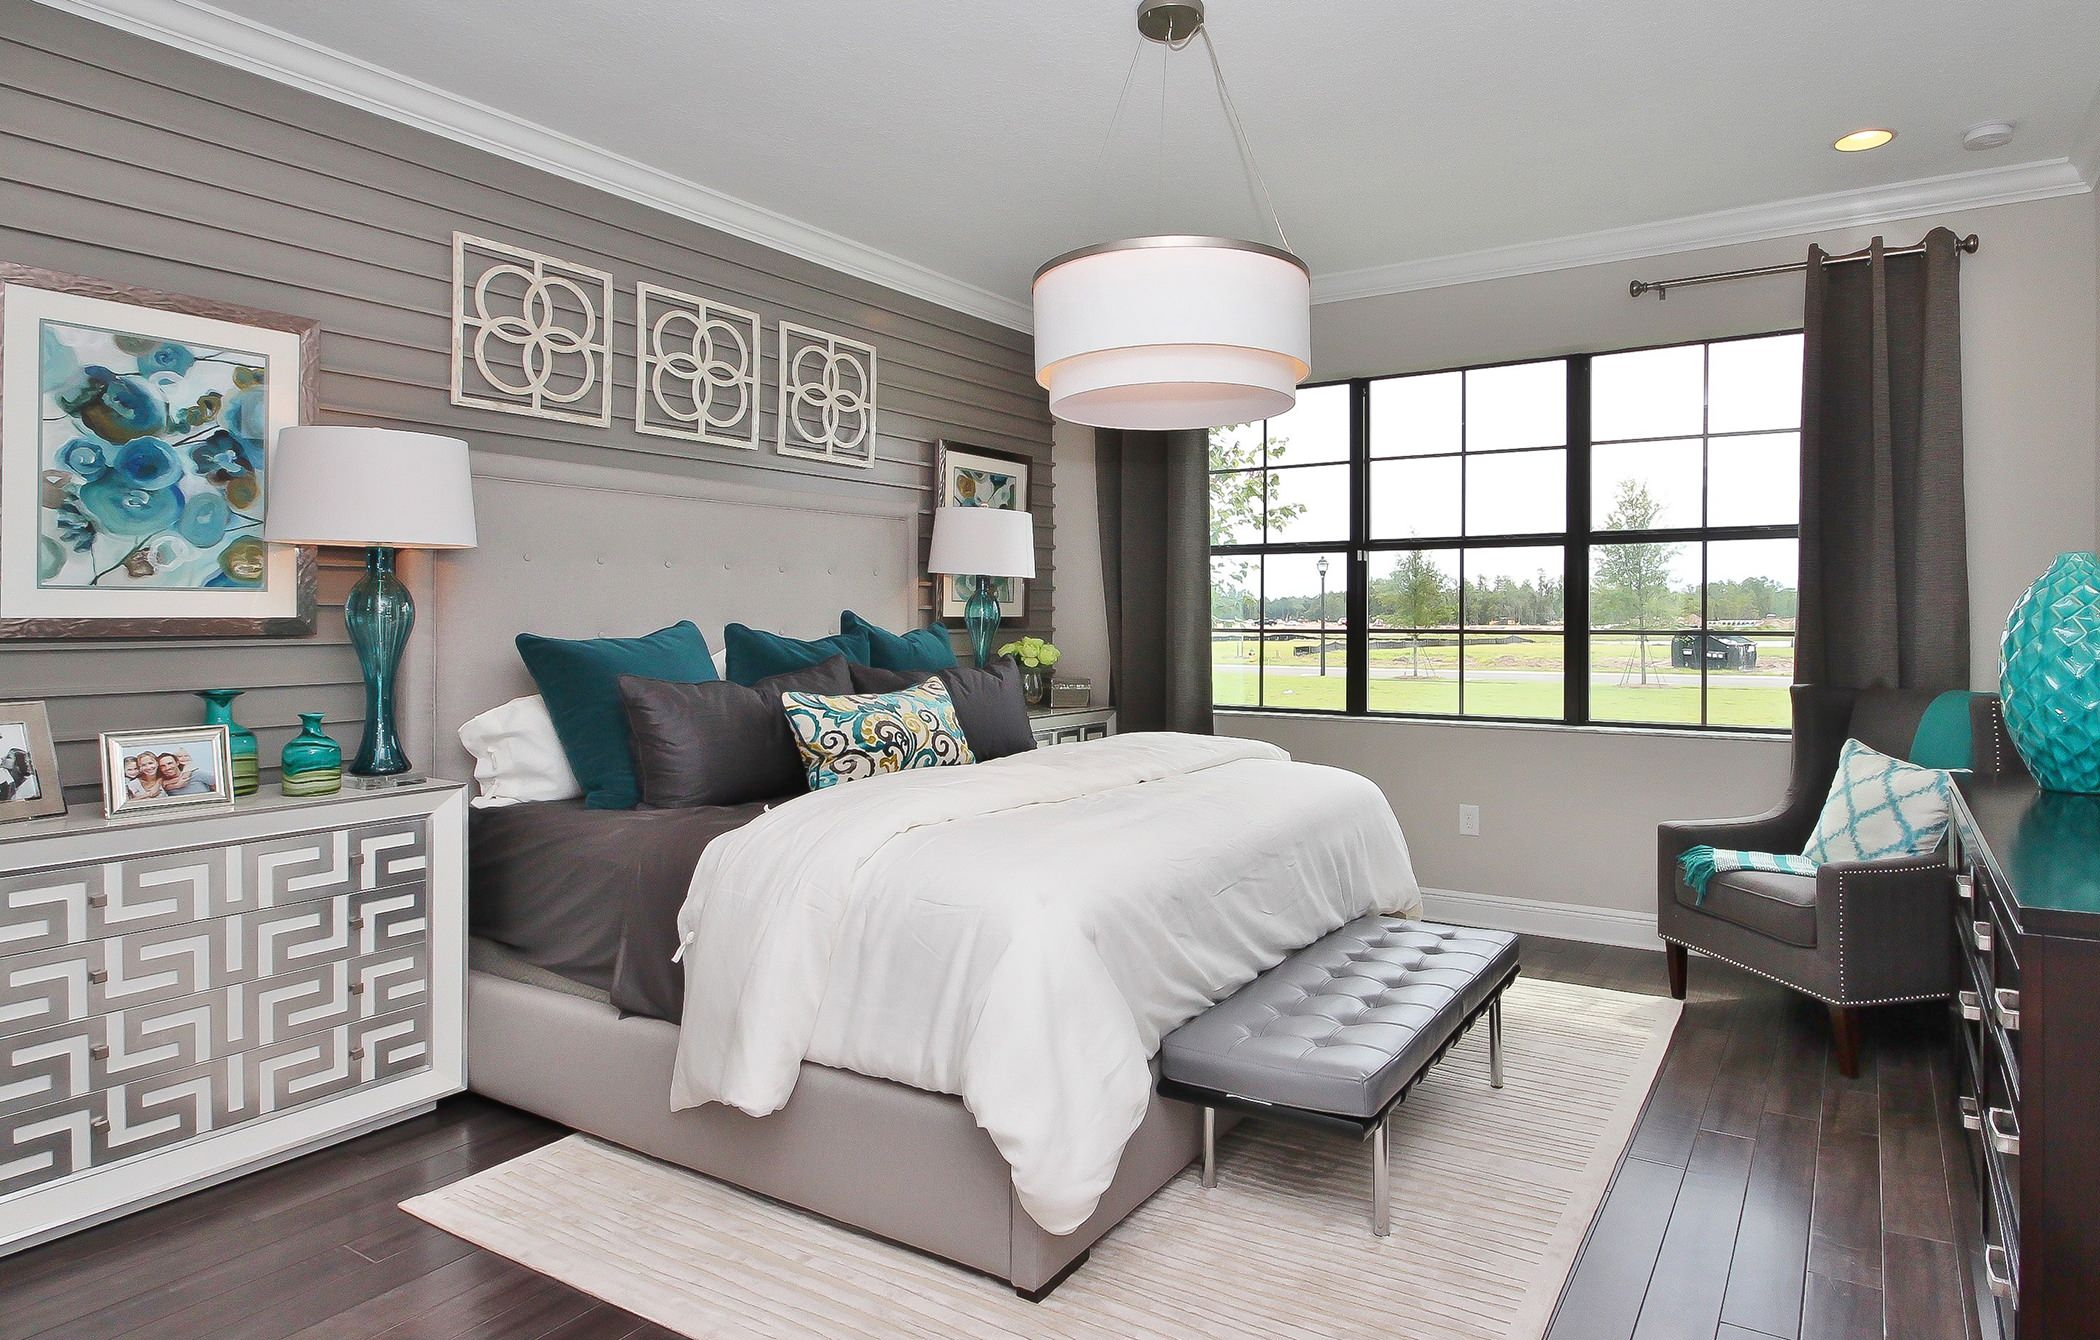 Alluring grey and teal bedroom Turquoise And Gray Bedroom Ideas Photos Houzz